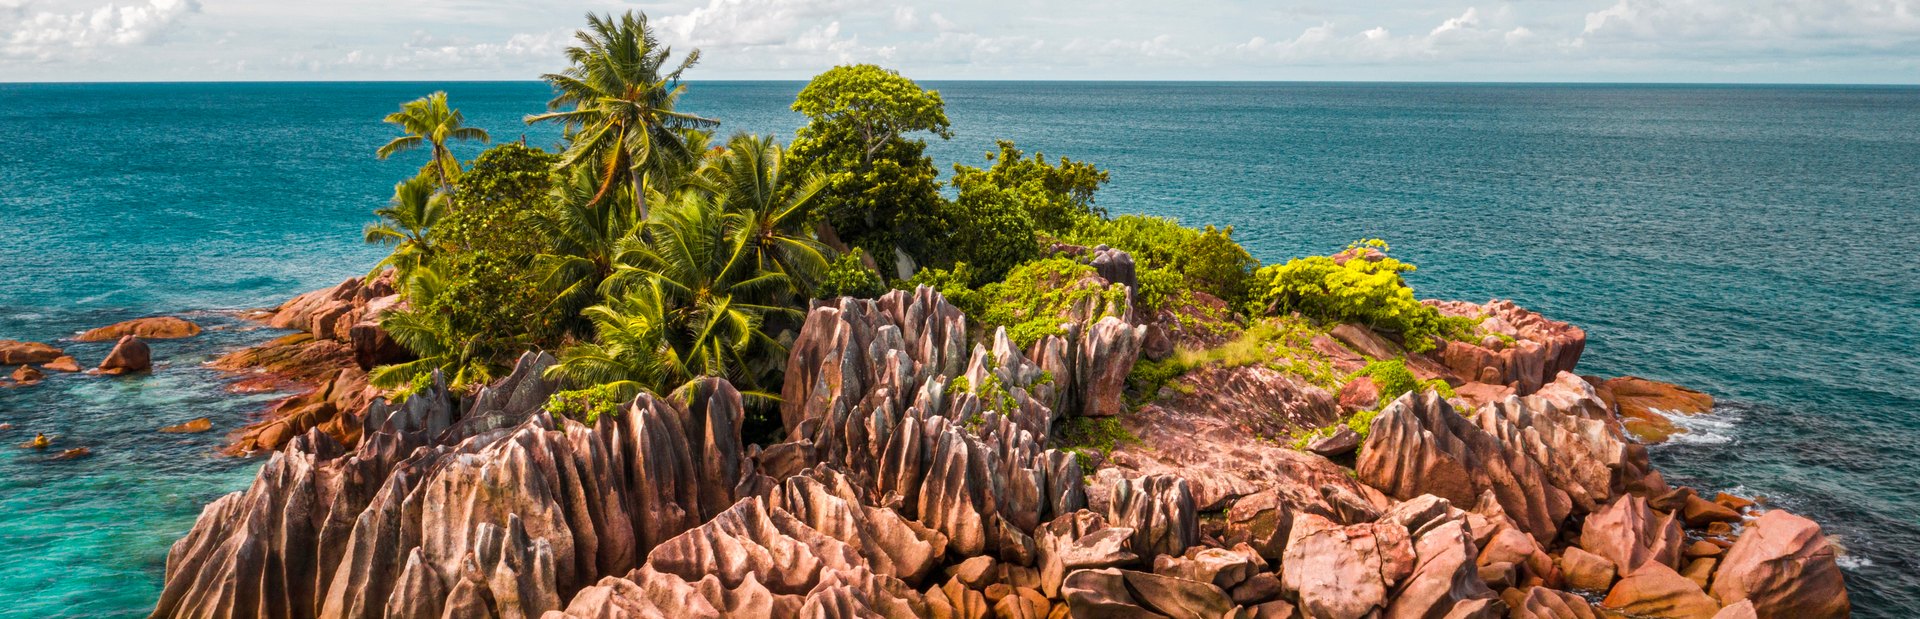 Treasure hunt: Discover a buried secret on your next Seychelles yacht charter